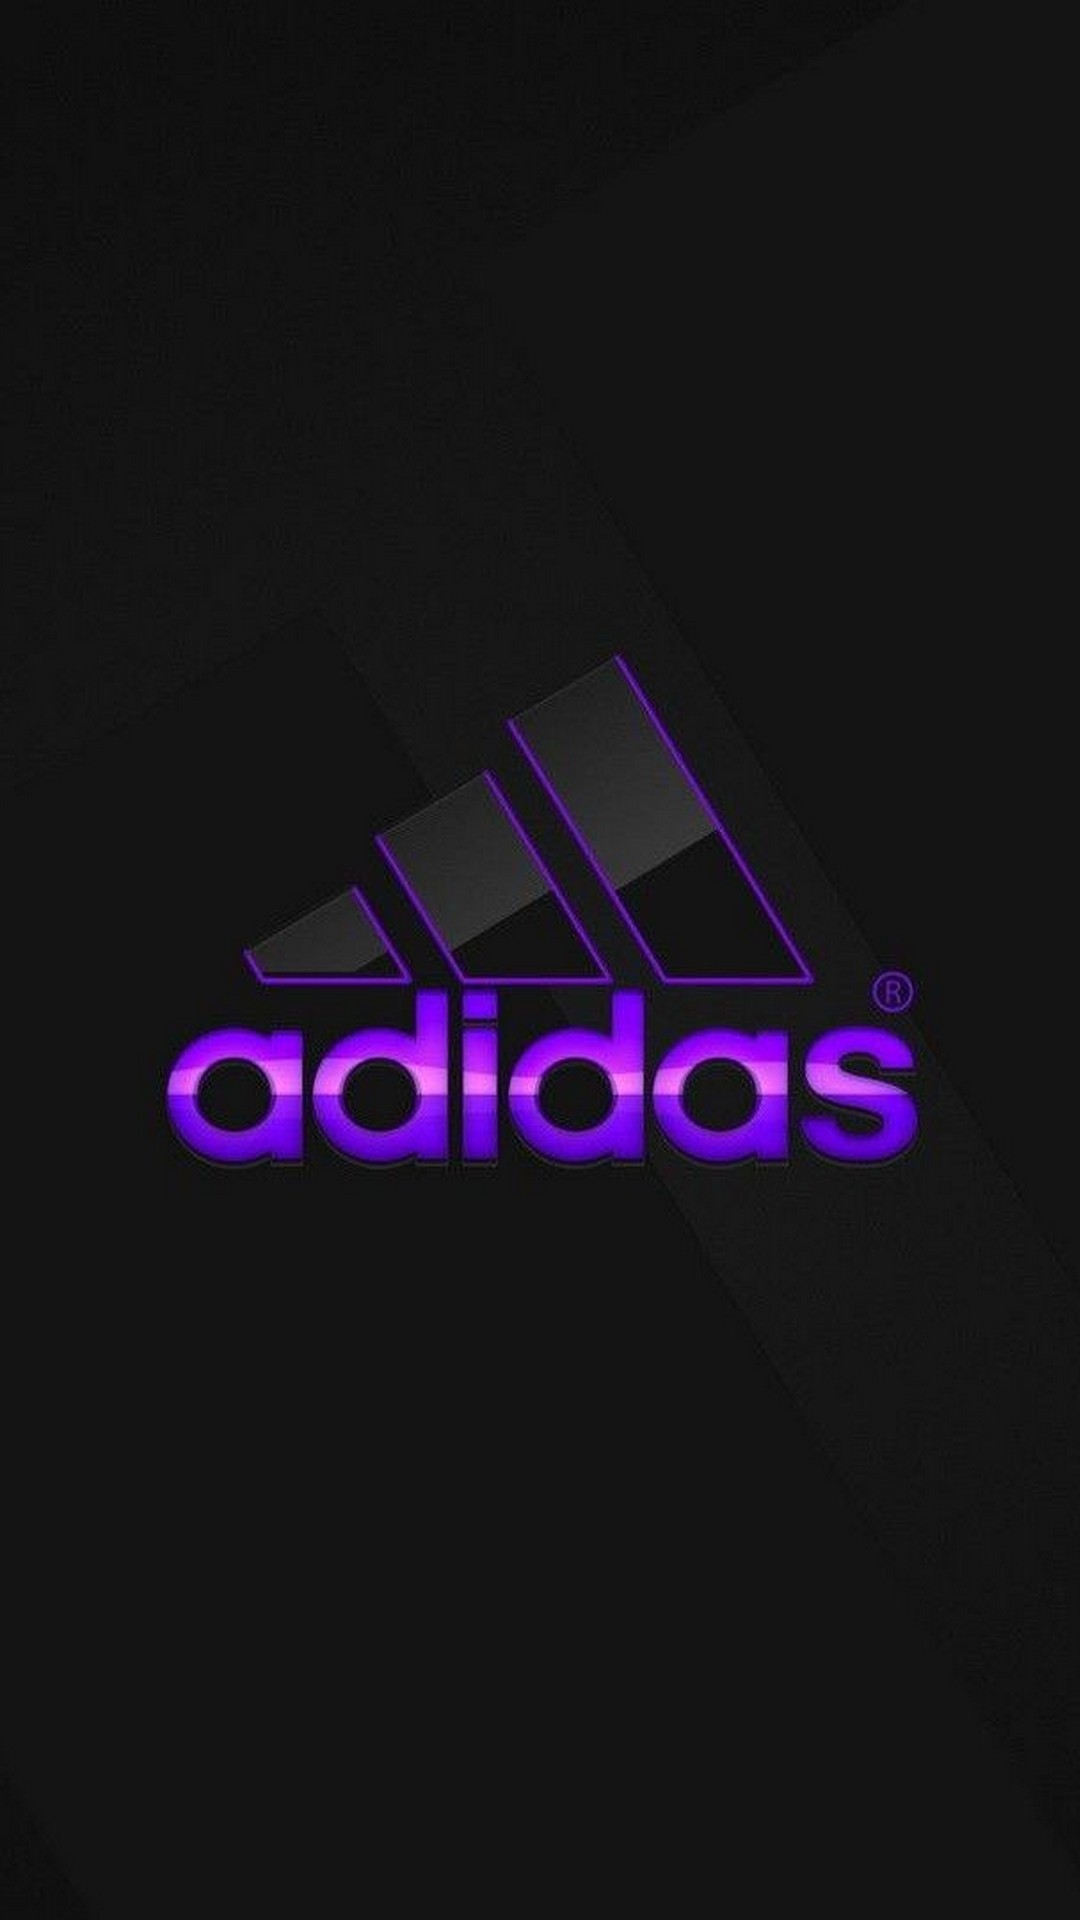 Android Wallpaper Adidas With high-resolution 1080X1920 pixel. You can use this wallpaper for your Android backgrounds, Tablet, Samsung Screensavers, Mobile Phone Lock Screen and another Smartphones device